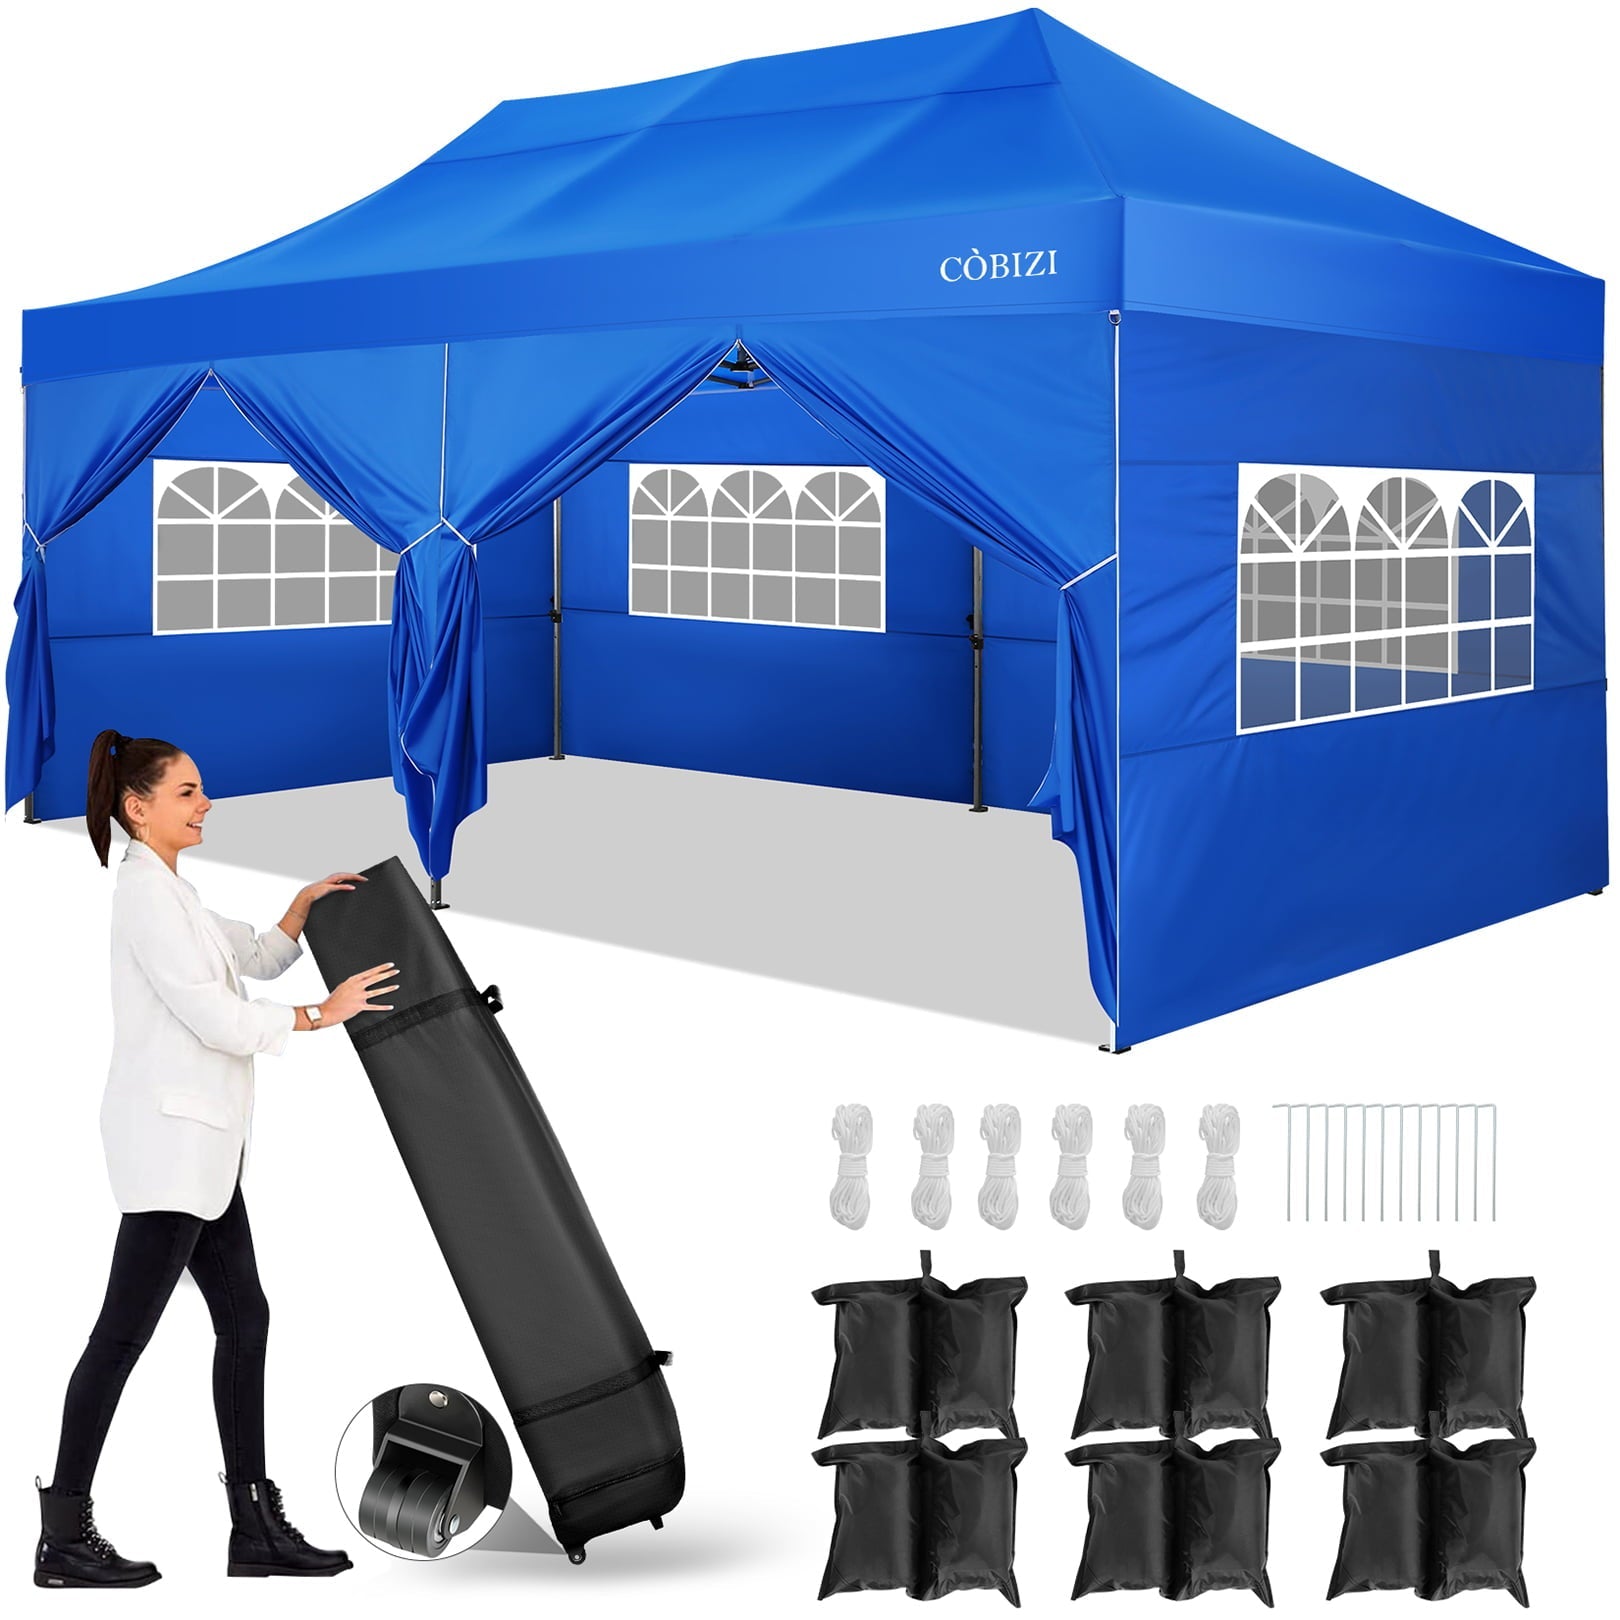 10'x20' Canopy EZ Pop Up Canopy Anti-UV Waterproof Outdoor Tent Portable Party Commercial Instant Canopy Shelter Height Adjustable Tent Gazebo with 6 Removable Sidewalls, 6 Sandbags, Roller Bag, Blue